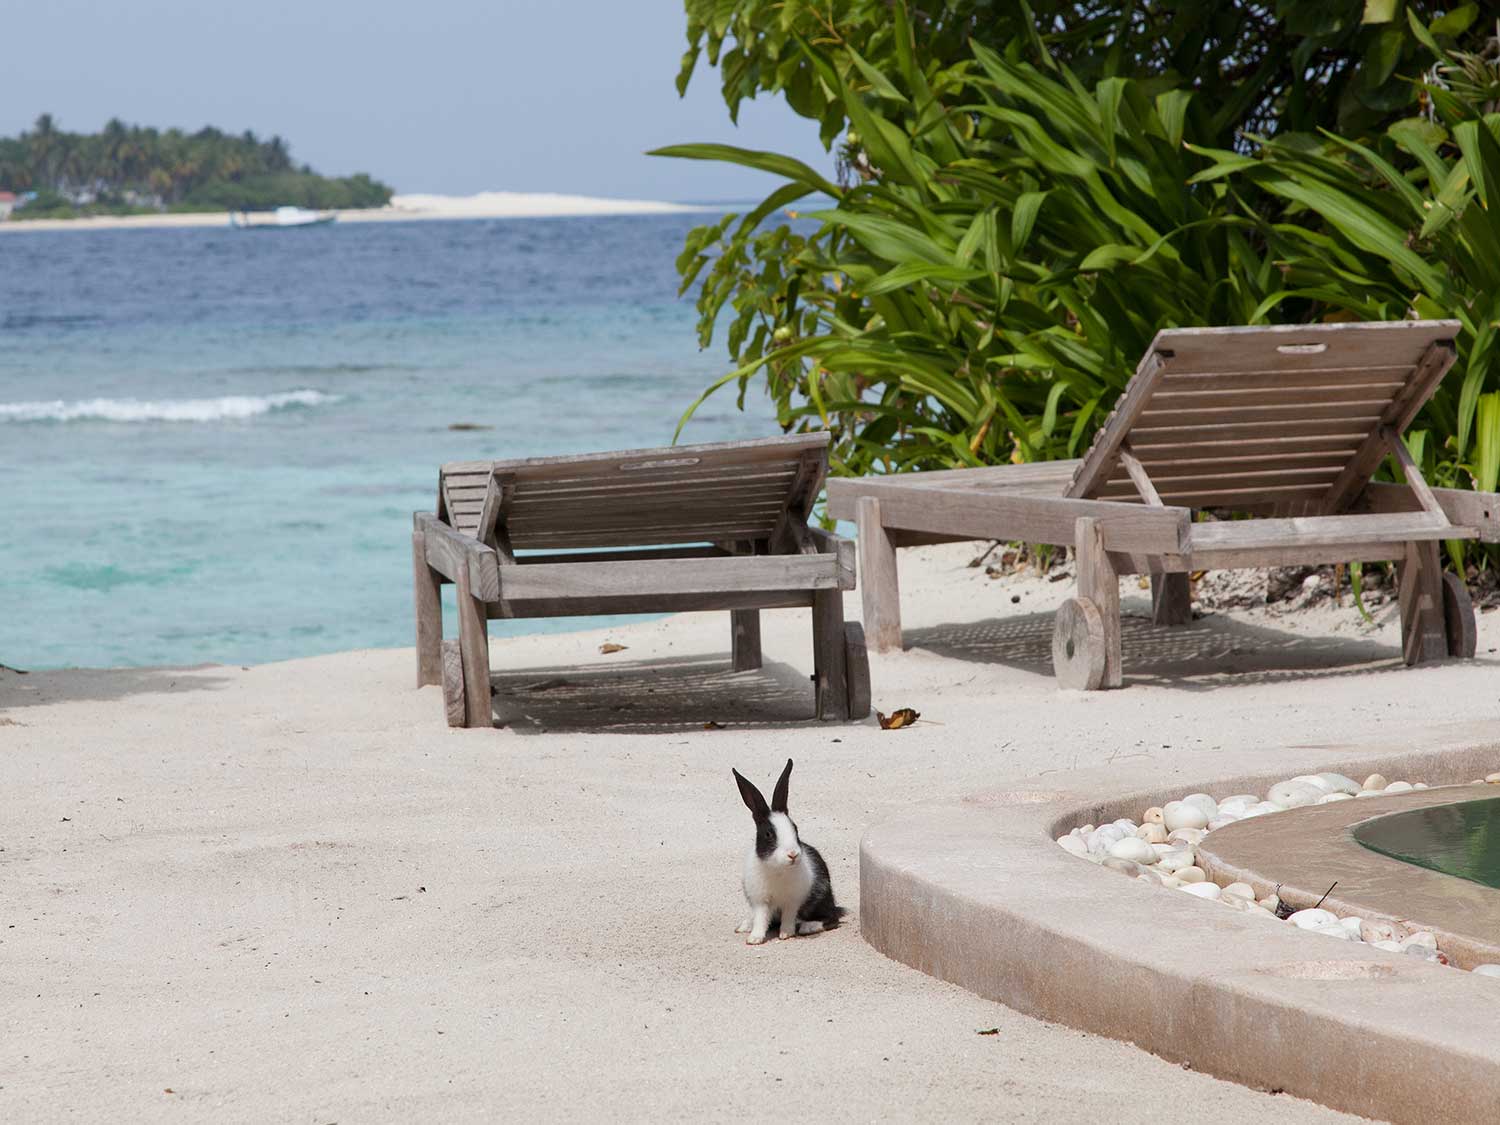 A single bunny standing next to a beach resort lounge area.